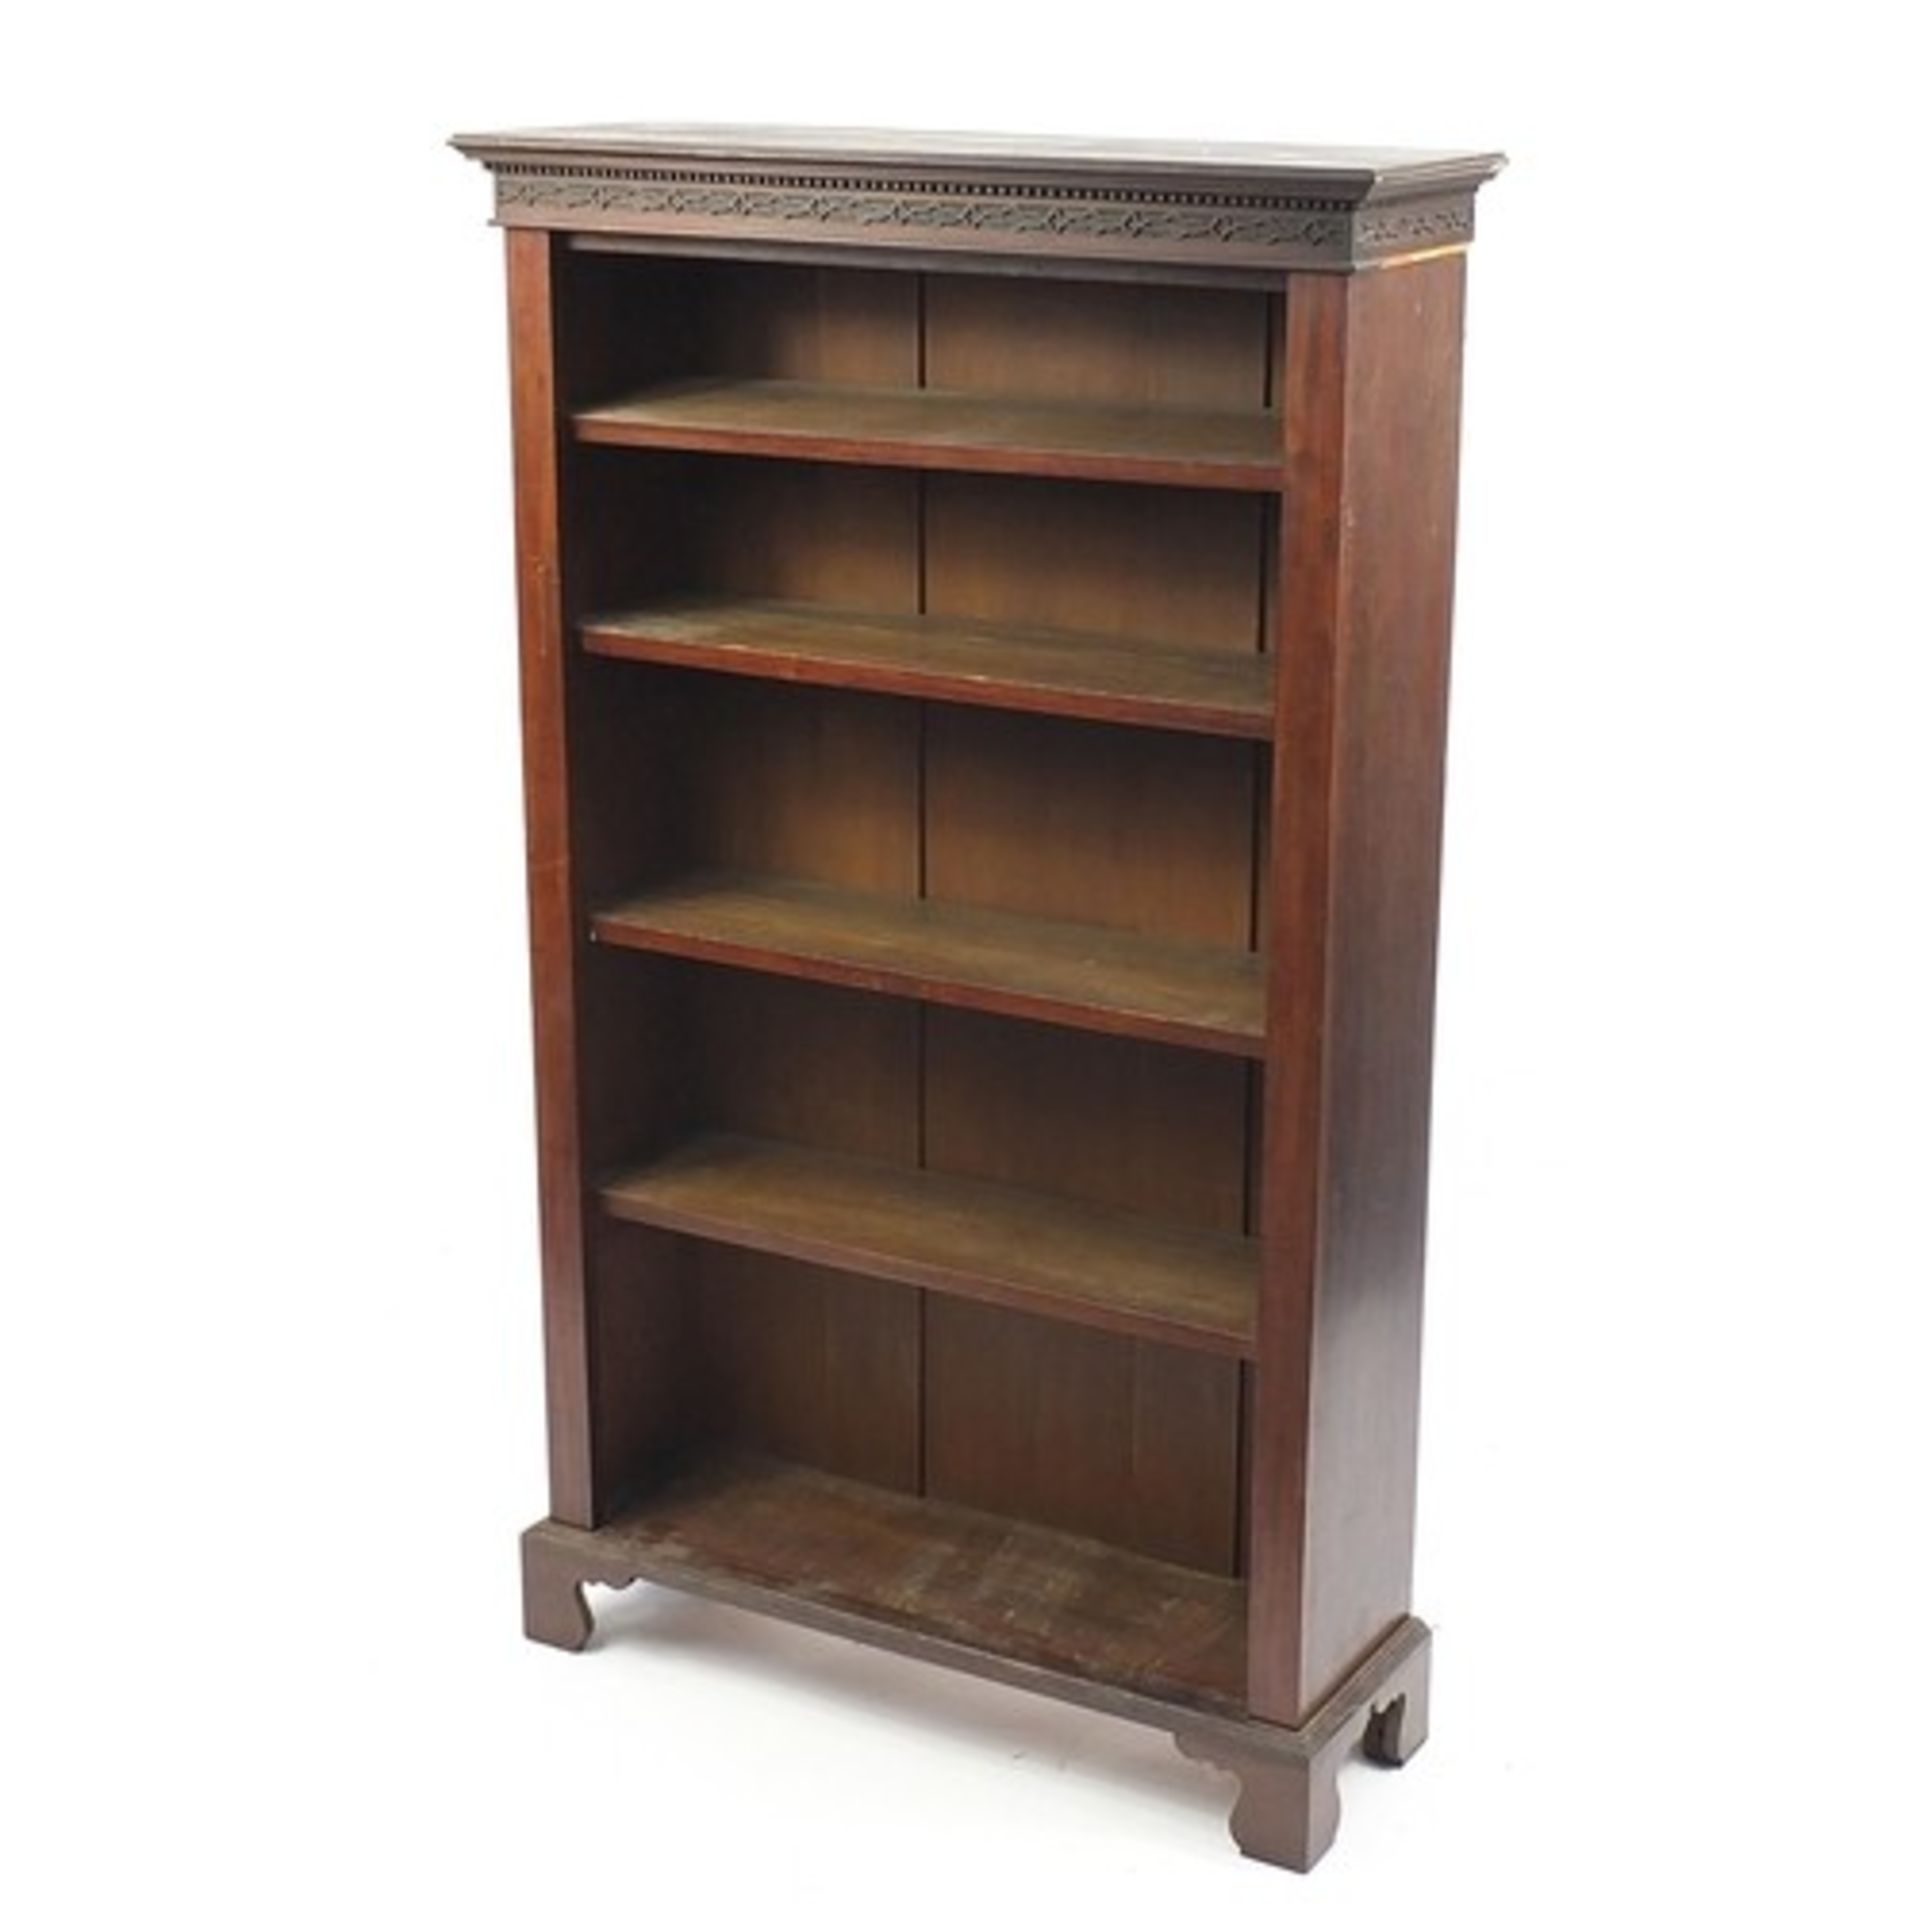 Mahogany open bookcase with blind fretwork cornice and five shelves, 160cm H x 96cm W x 31cm D